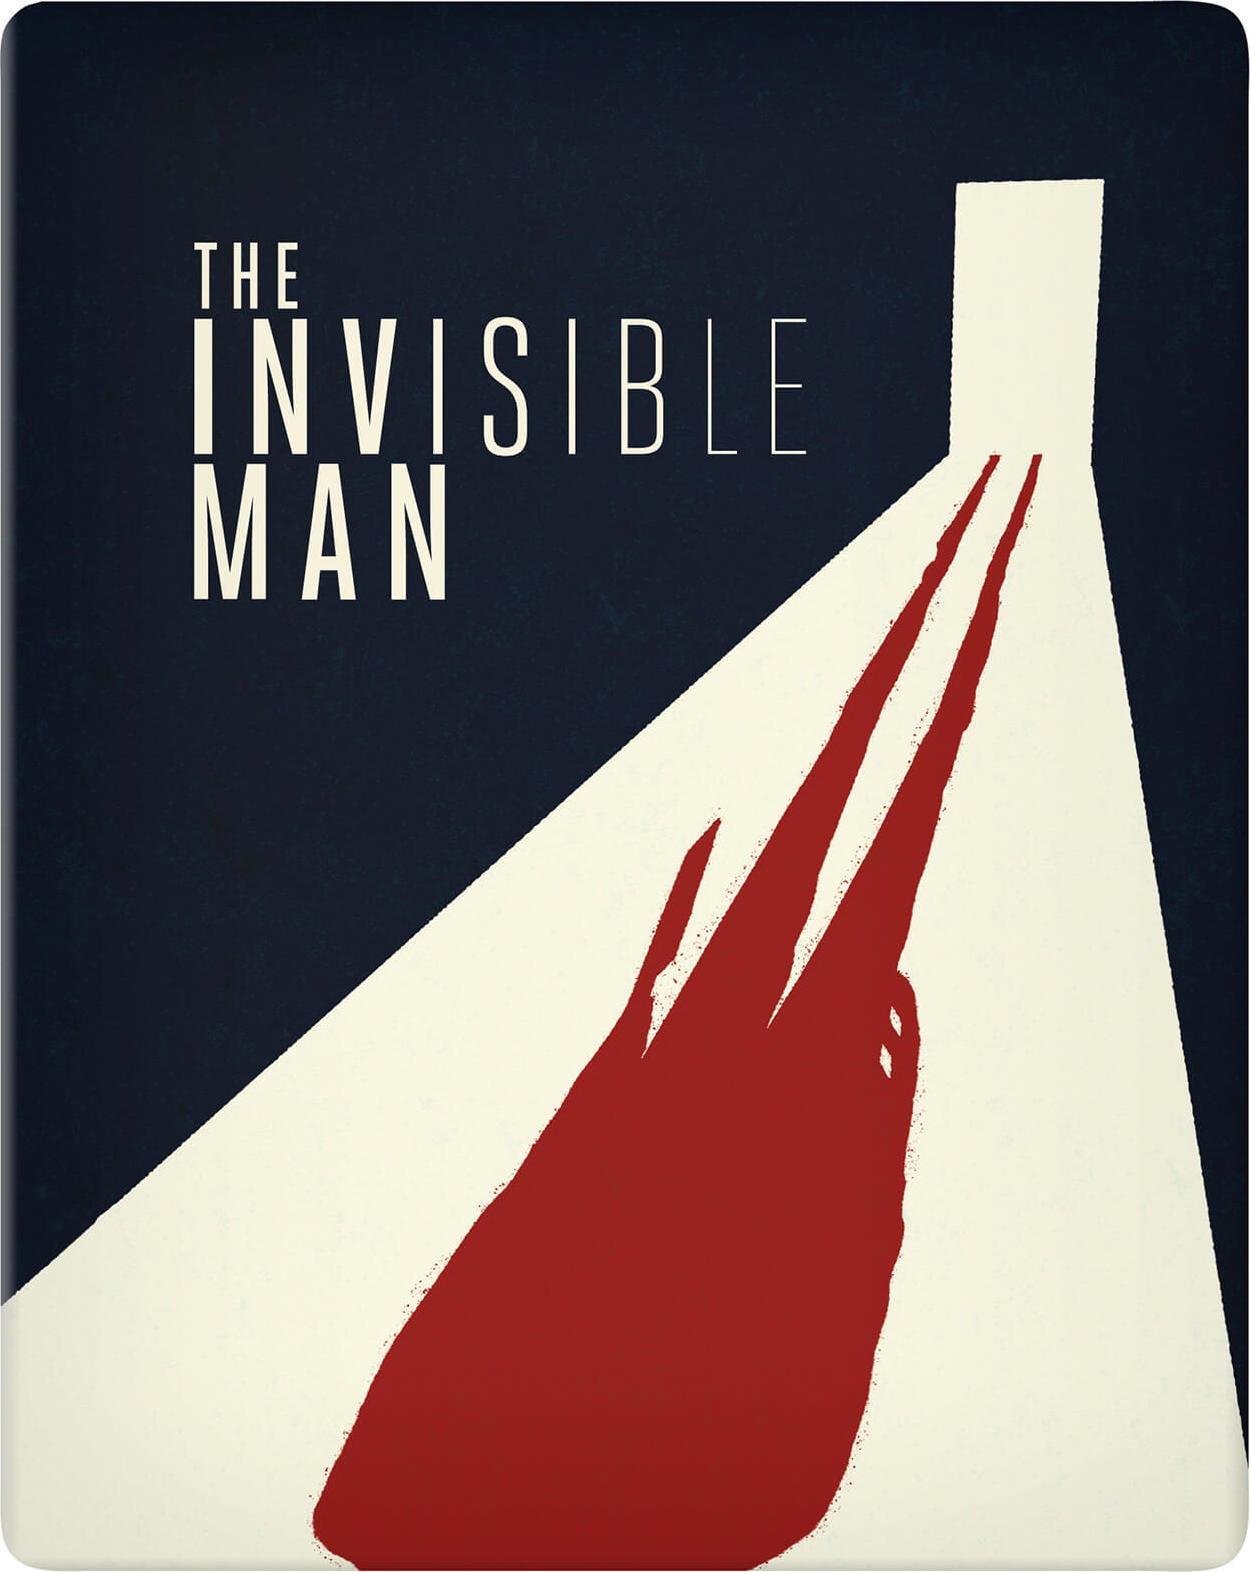 THE INVISIBLE MAN (REGION FREE/B IMPORT - LIMITED EDITION) 4K UHD/BLU-RAY STEELBOOK